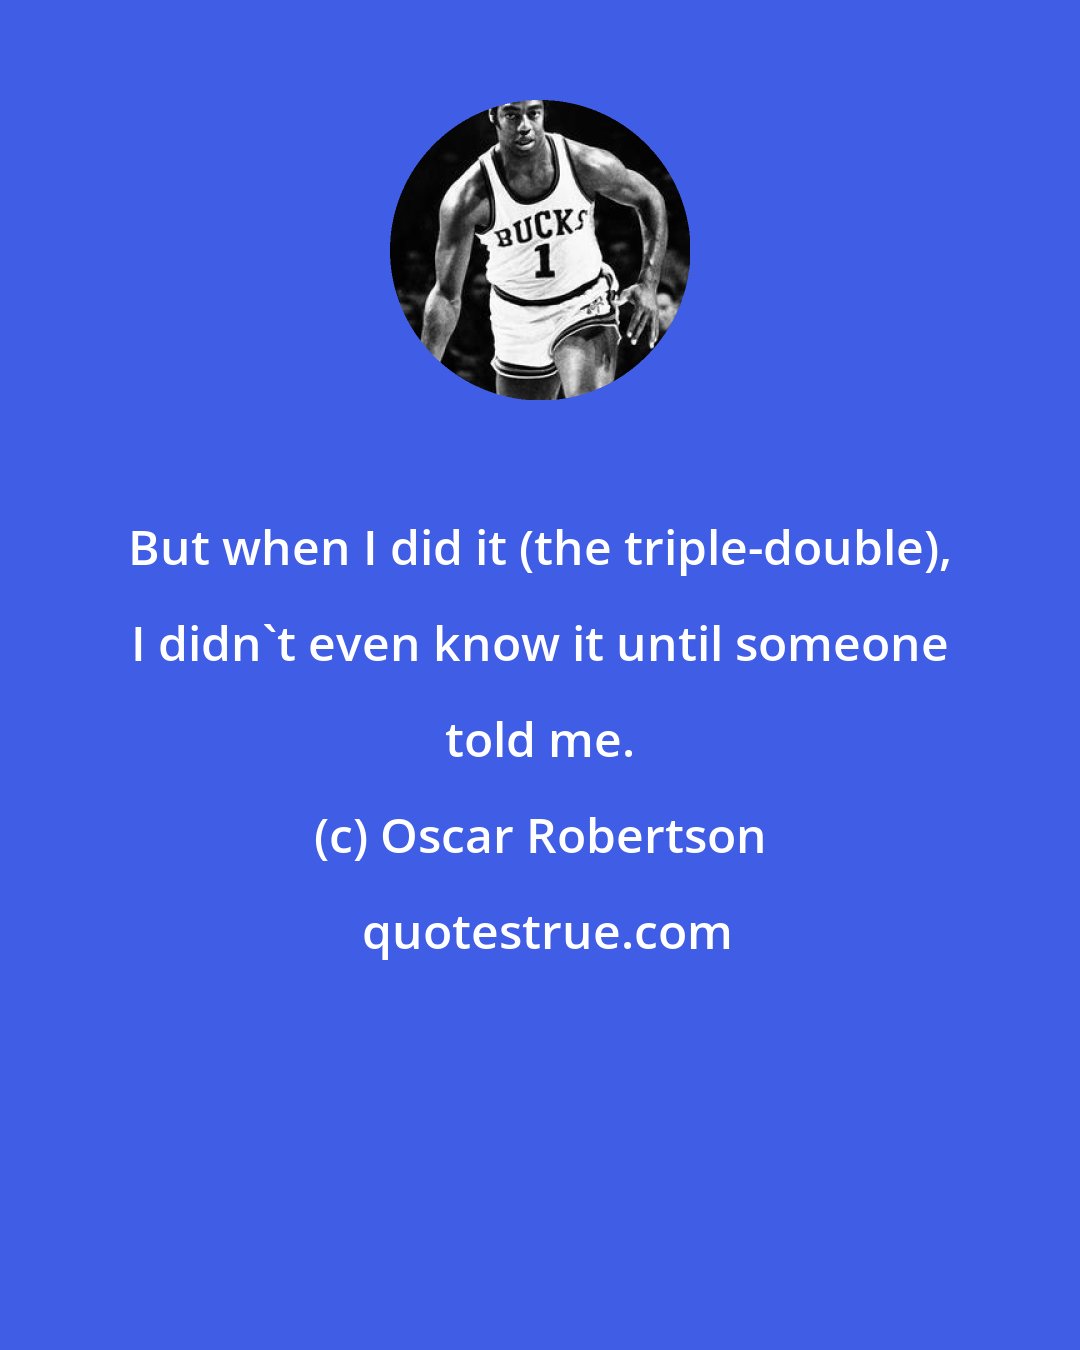 Oscar Robertson: But when I did it (the triple-double), I didn't even know it until someone told me.